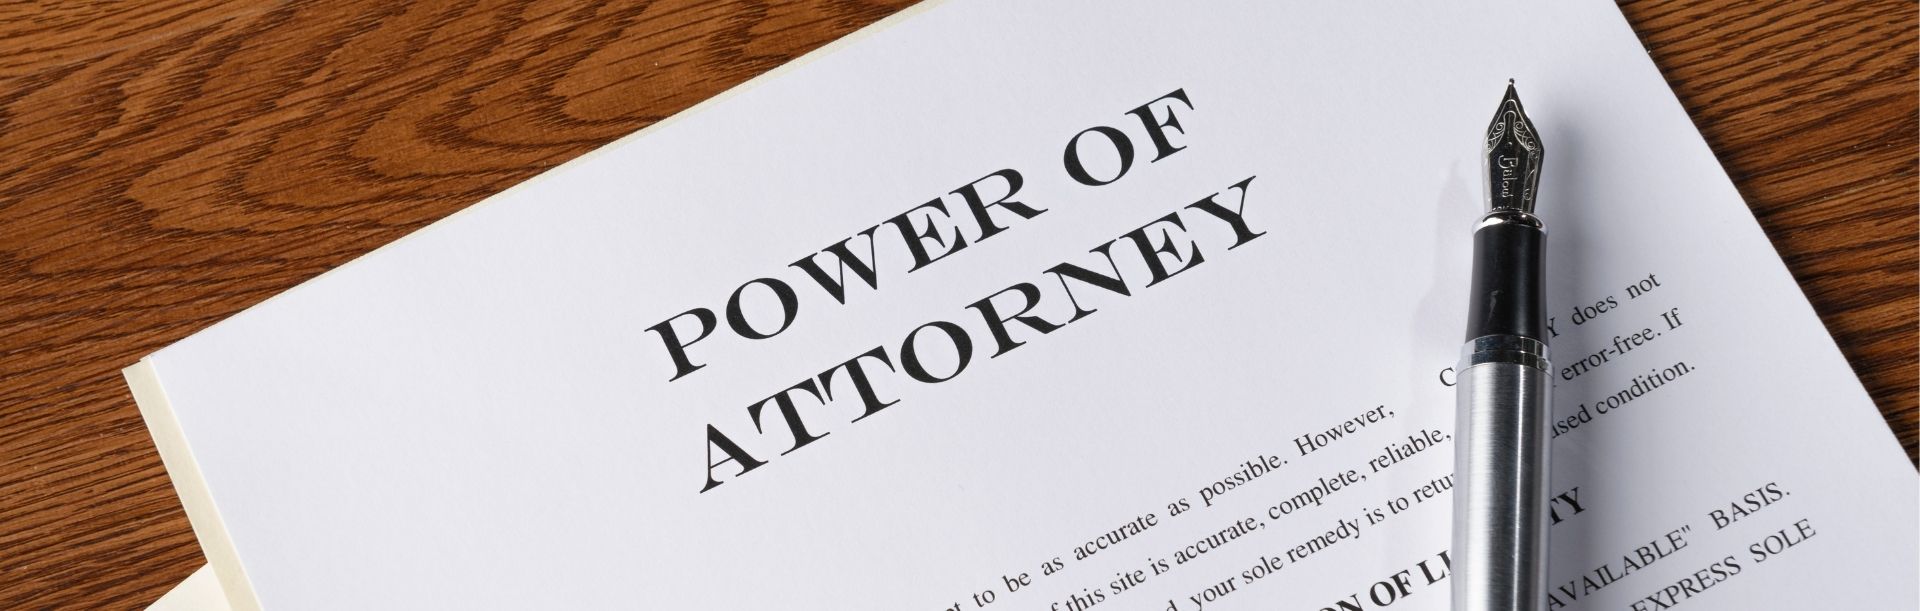 Power of Attorney documents displayed on a wooden desk